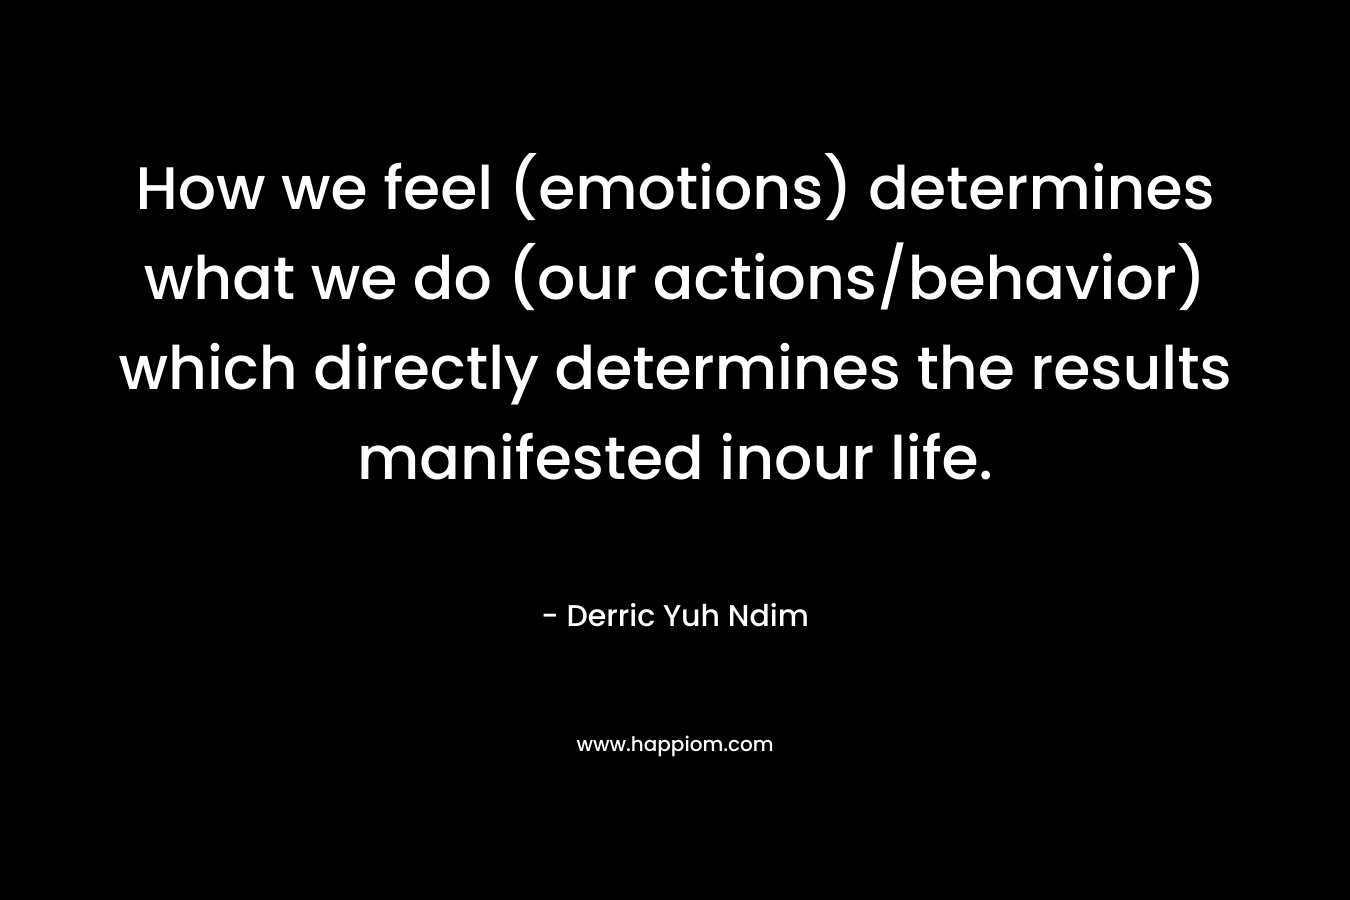 How we feel (emotions) determines what we do (our actions/behavior) which directly determines the results manifested inour life.